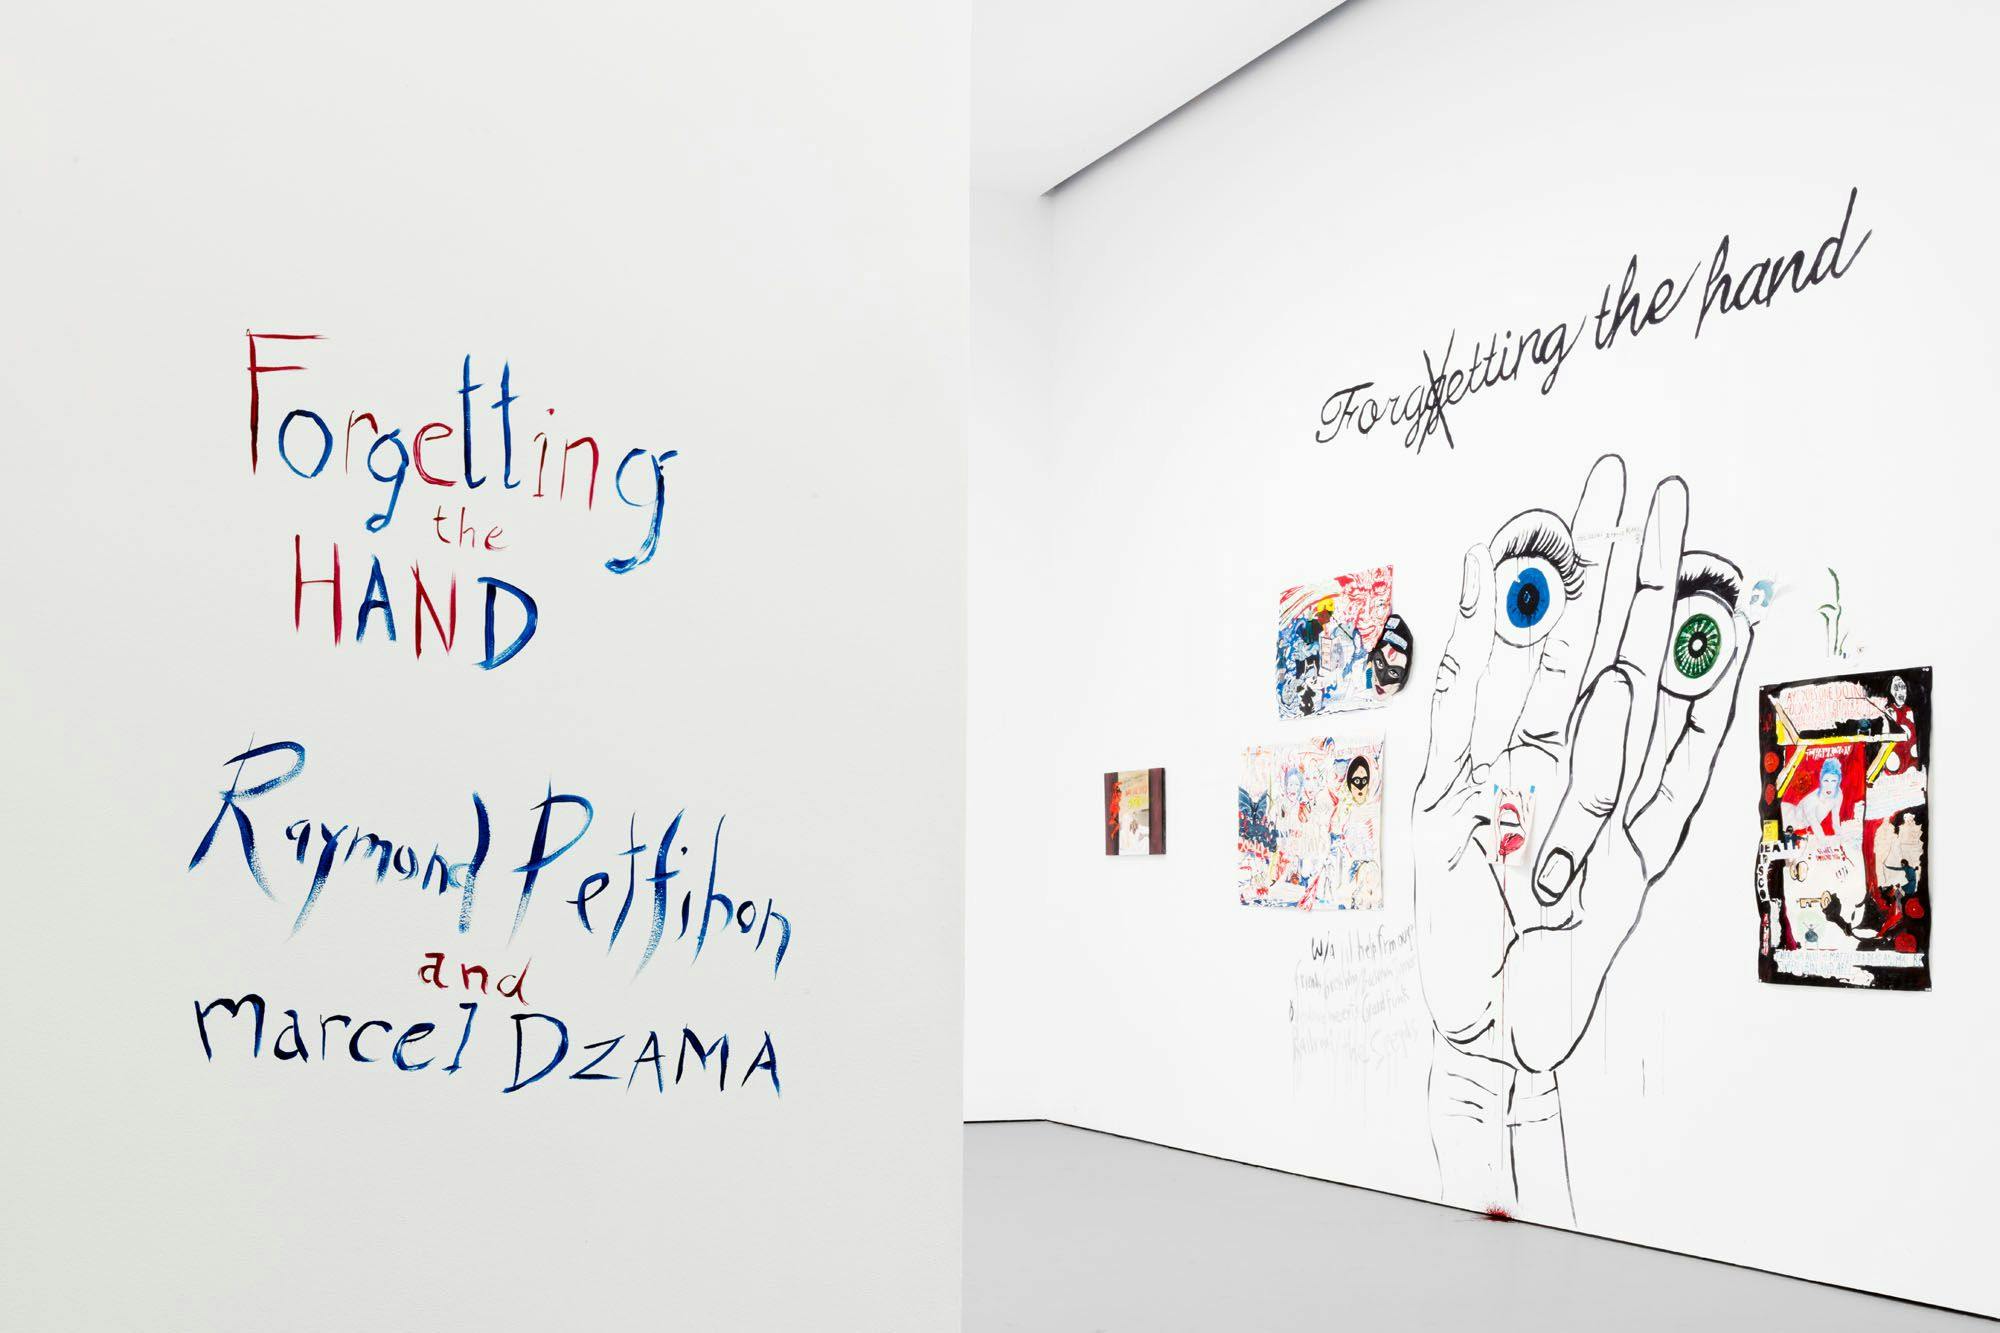 Installation view of the exhibition, Forgetting The Hand, at David Zwirner in New York, dated 2016.